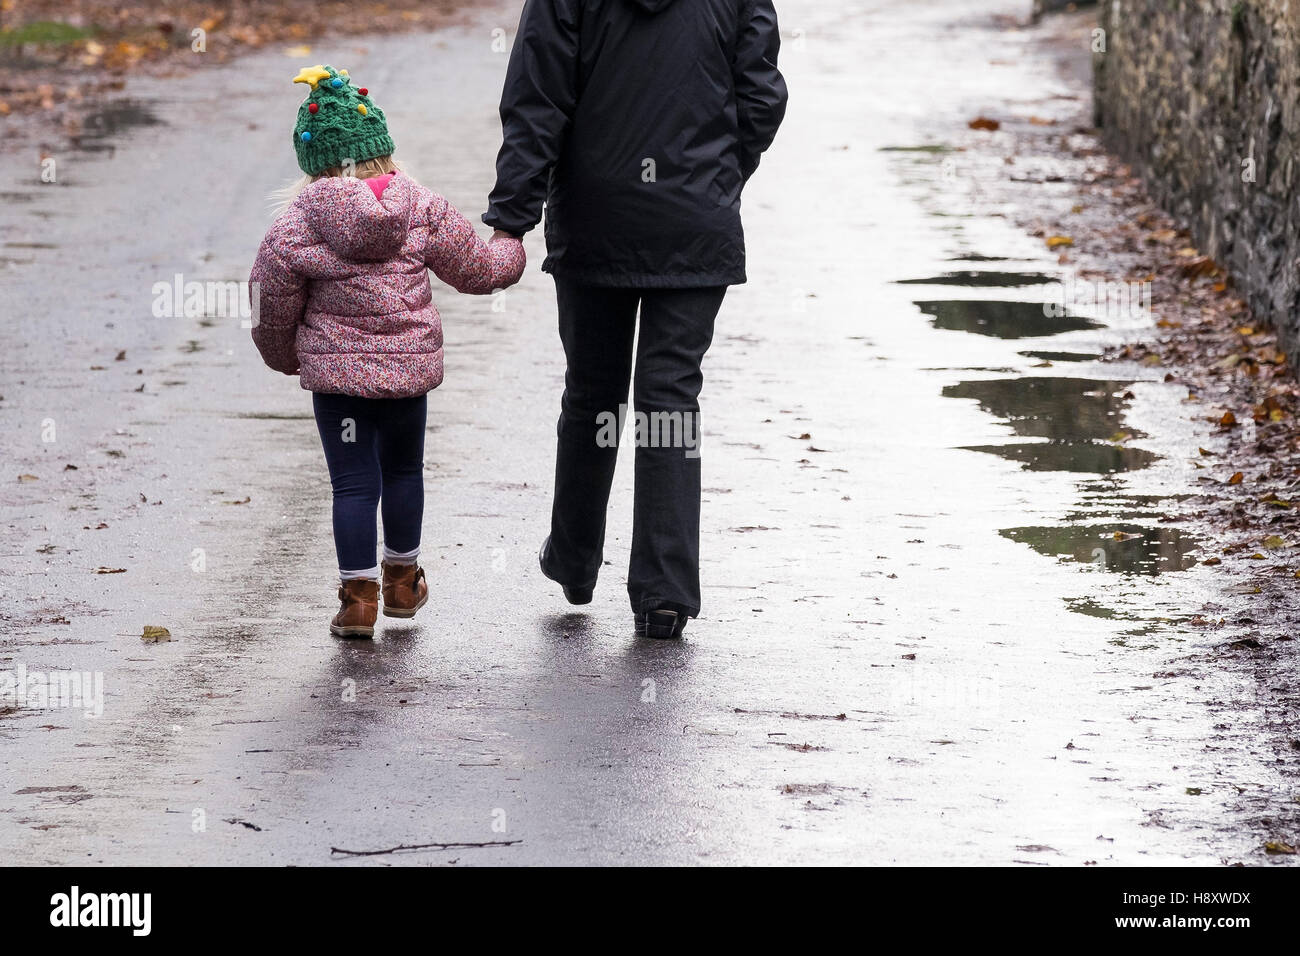 A child and an adult walking hand in hand down a road. Stock Photo